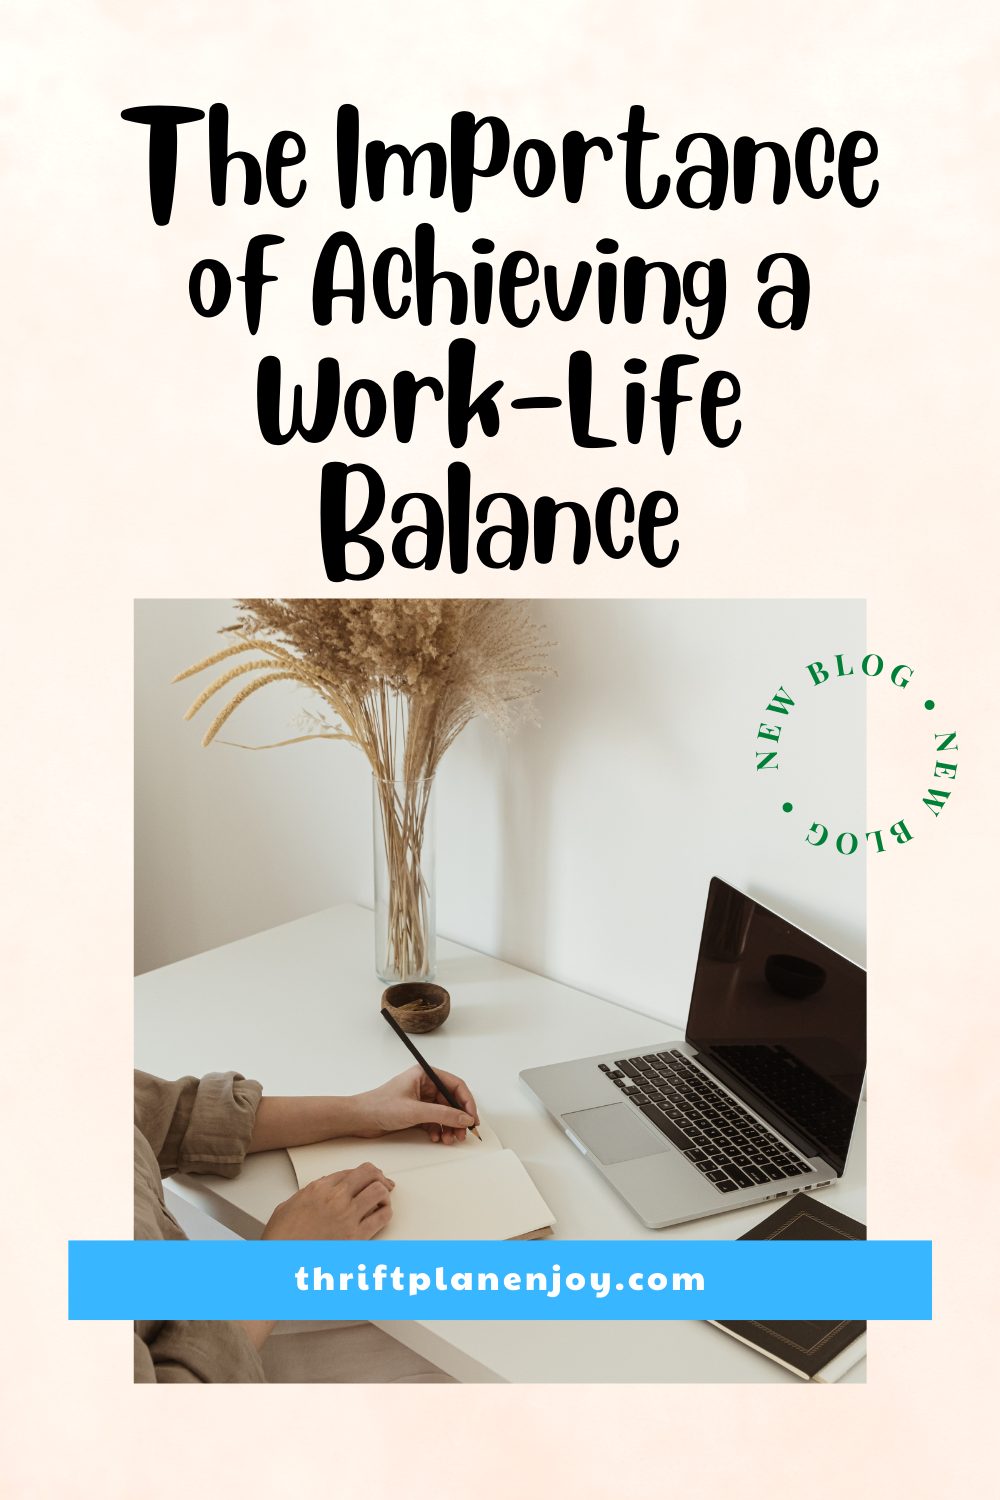 The Importance of Achieving a Work-Life Balance